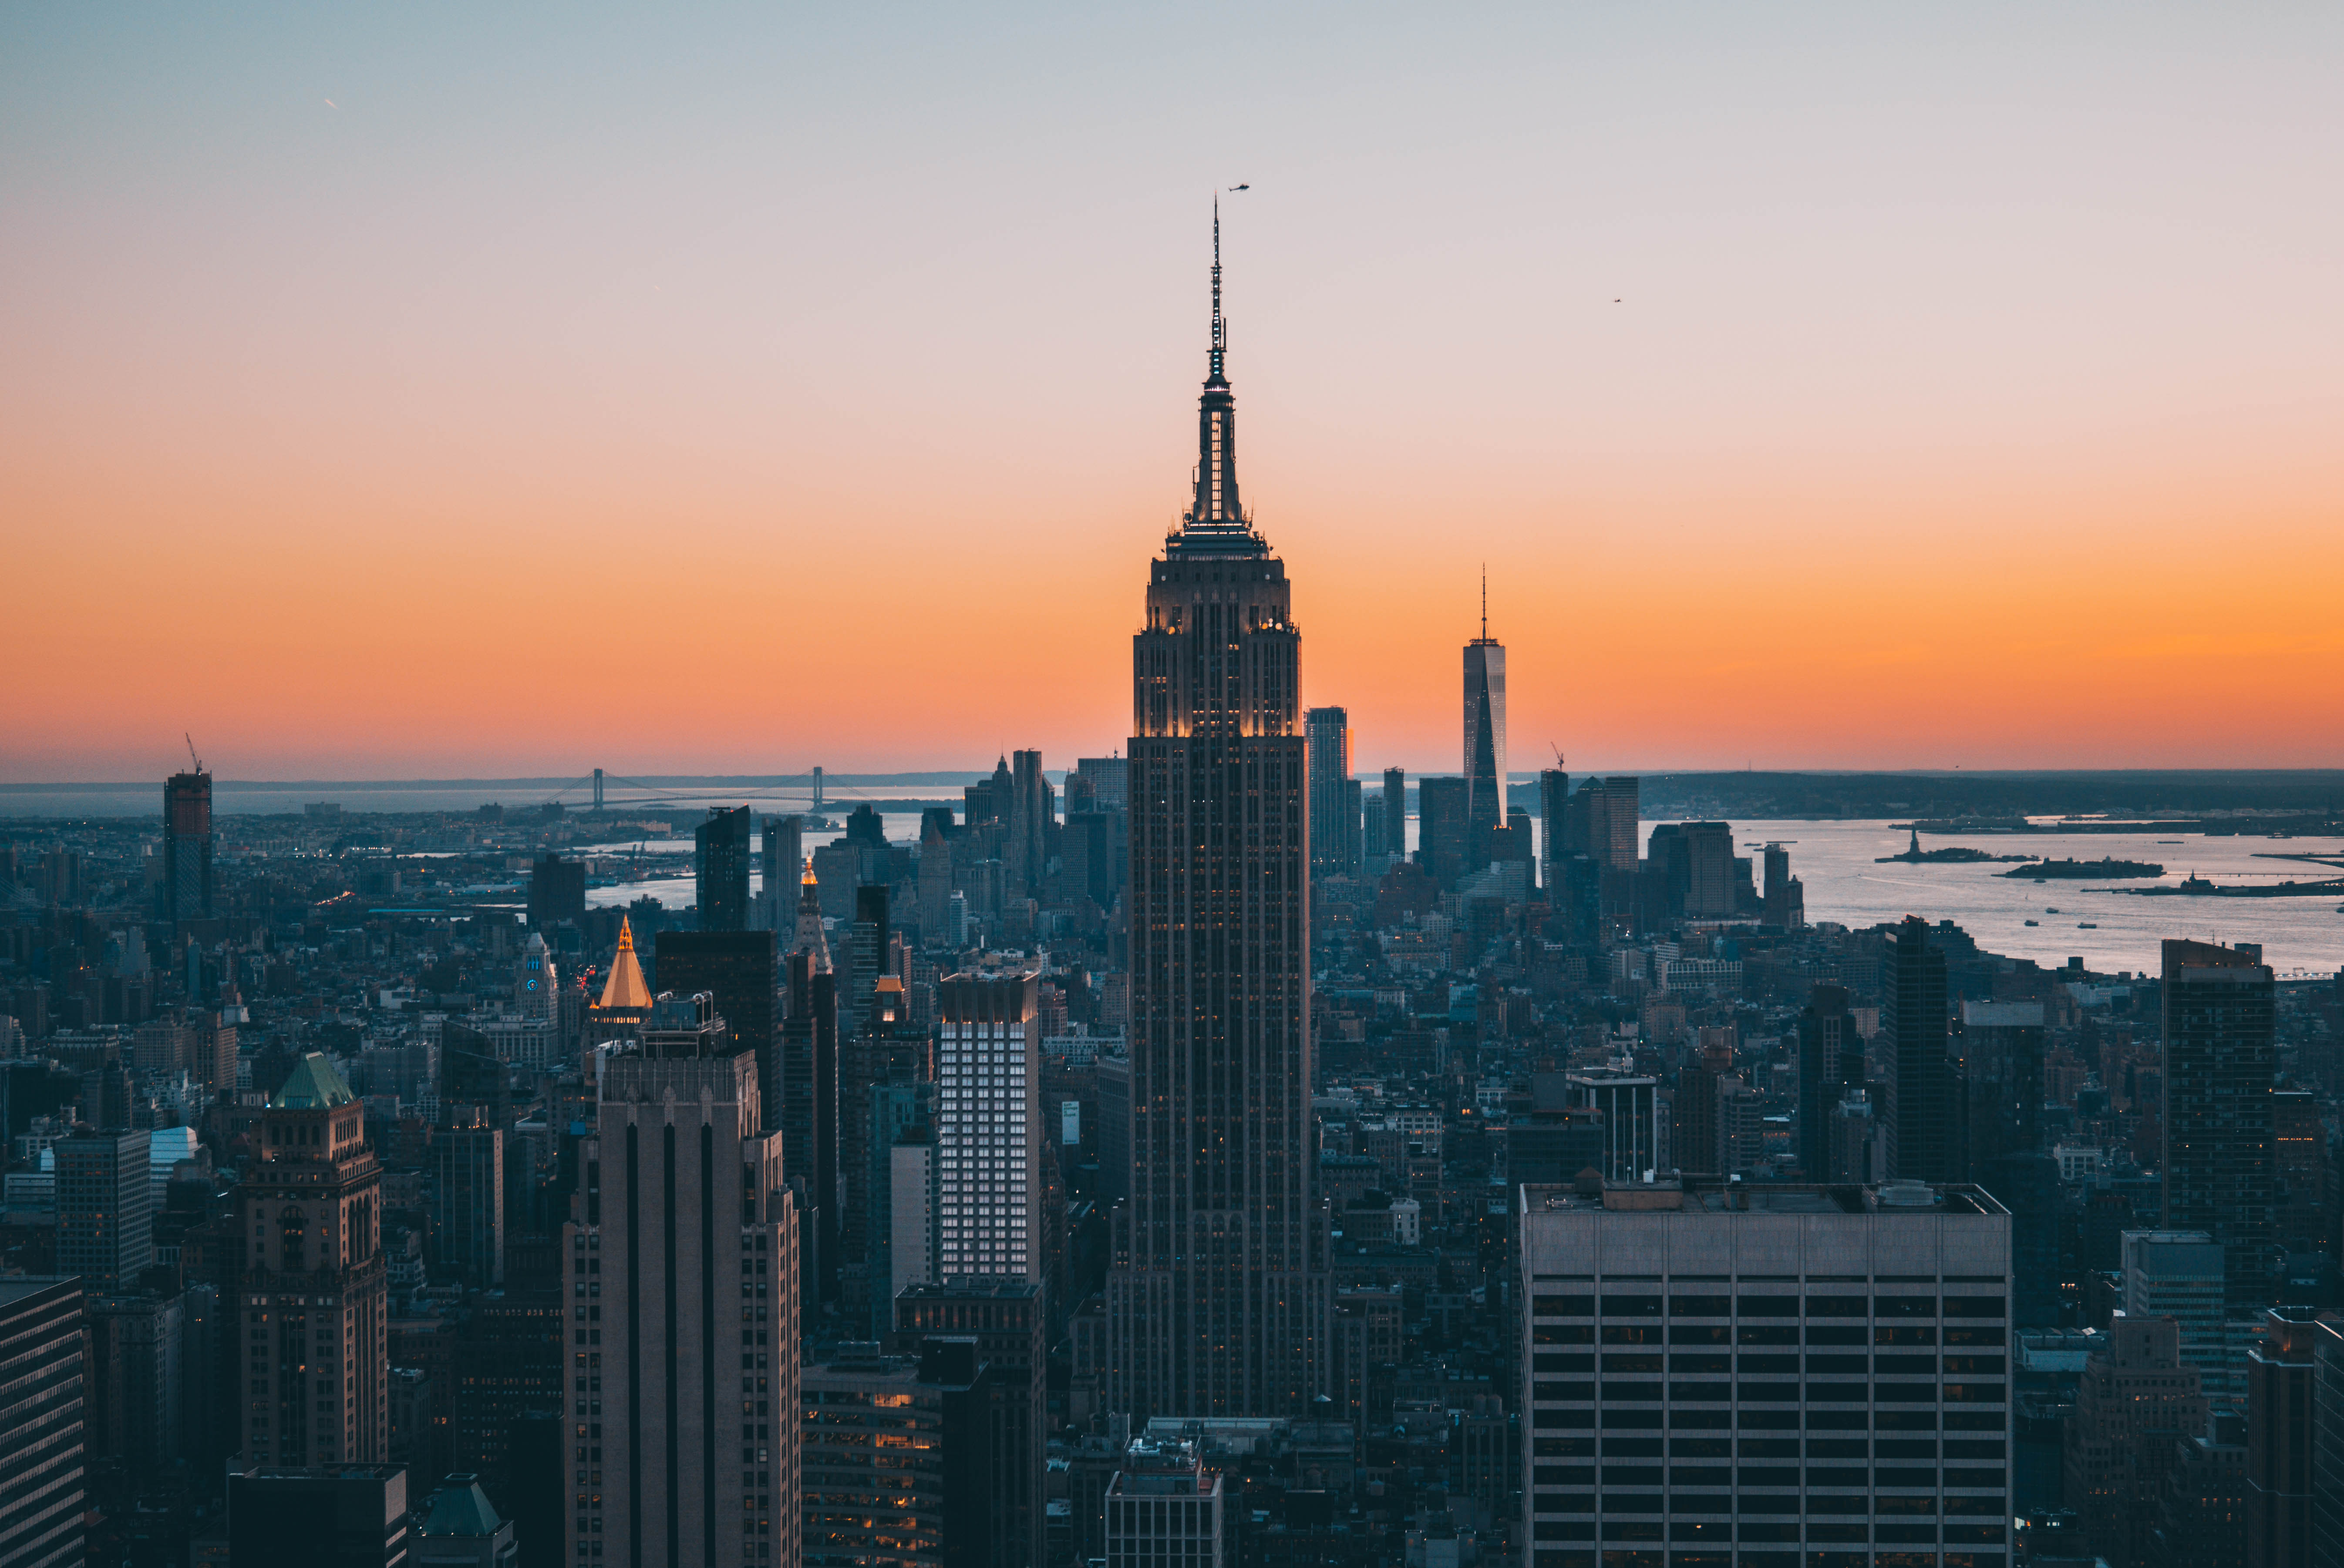 New York City, Sunset, Cityscape, Empire State Building, 30 Rockefeller Plaza, Top of the rock, Helicopter, Scyscrapers, USA, Manhattan, Building, One World Trade Center Wallpaper